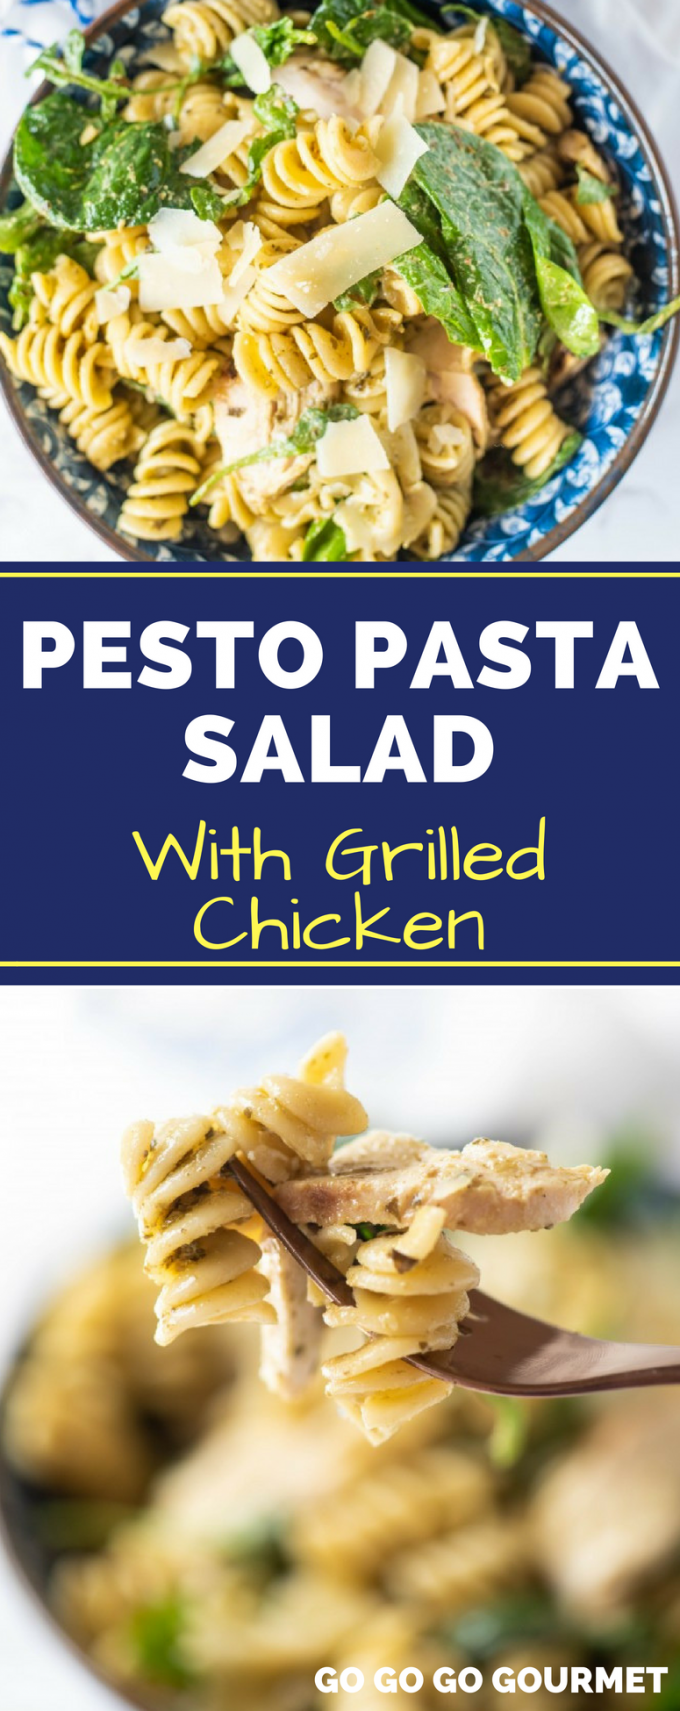 This cold Pesto Pasta Salad with Grilled Chicken is one of the best pasta salad recipes! Made easy and healthy with ingredients like arugula and baby spinach, this recipe even rivals the Pioneer Woman! #pestopastasalad #summerbbqrecipes #pastasaladrecipes #gogogogourmet via @gogogogourmet